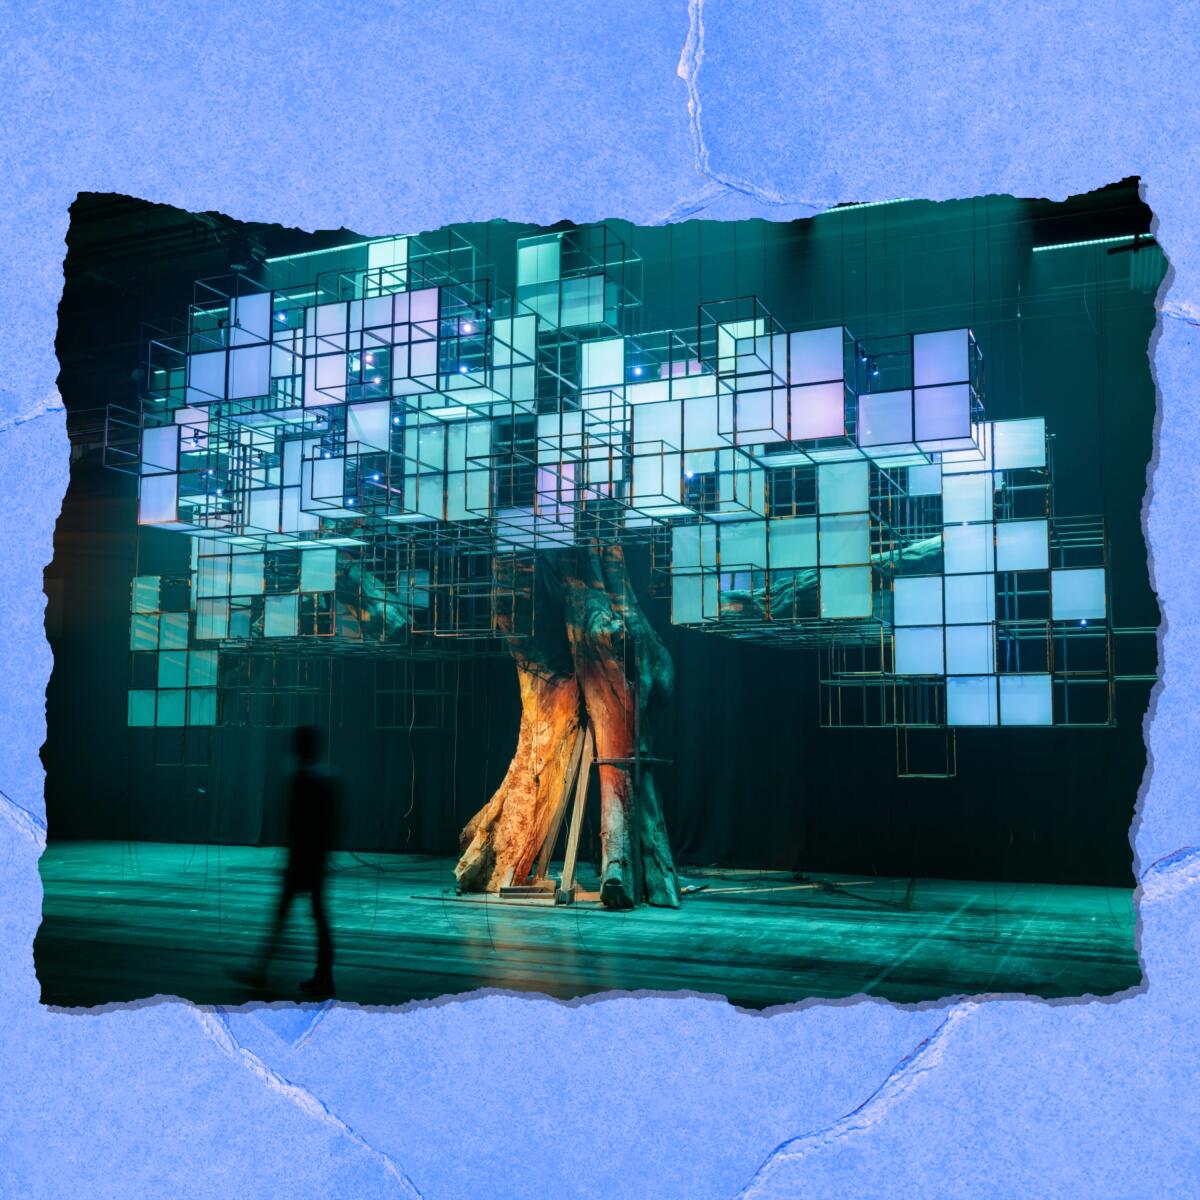 A structure on a stage looks like a tree trunk holding up a metal structure of cubes.